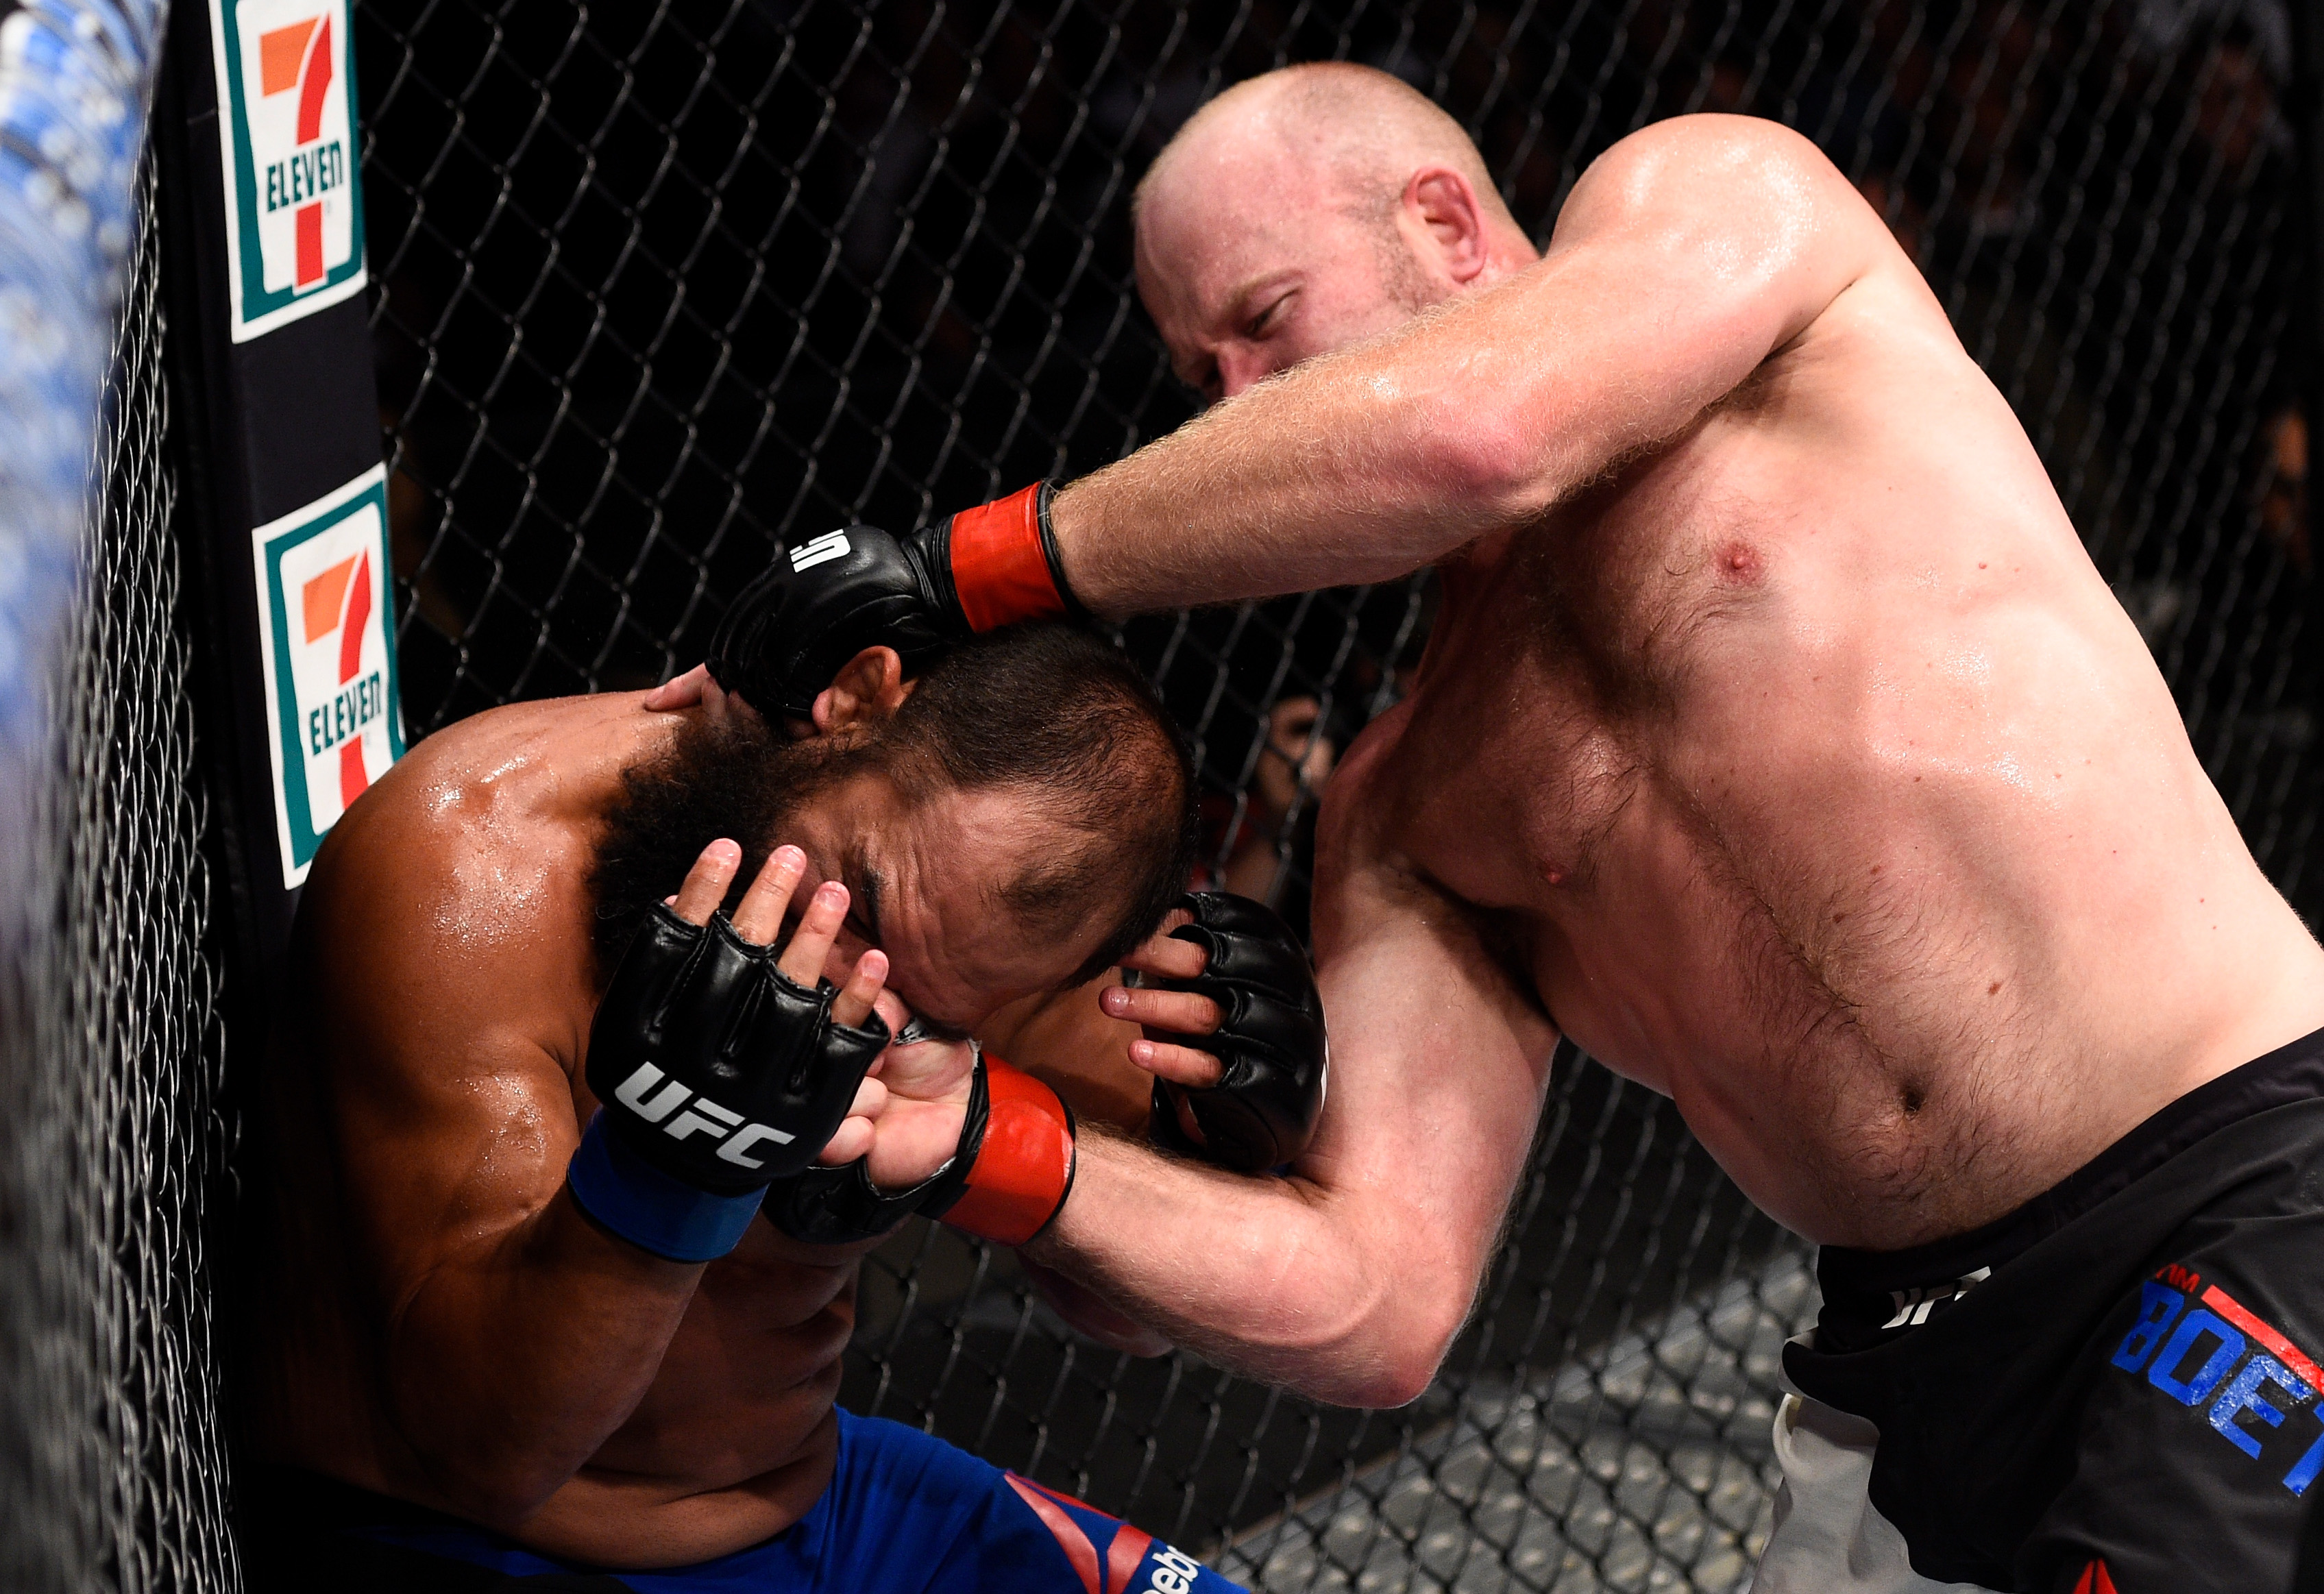 OKLAHOMA CITY, OK - JUNE 25: (R-L) Tim Boetsch punches Johny Hendricks in their middleweight bout during the UFC Fight Night event at the Chesapeake Energy Arena on June 25, 2017 in Oklahoma City, Oklahoma. (Photo by Brandon Magnus/Zuffa LLC)